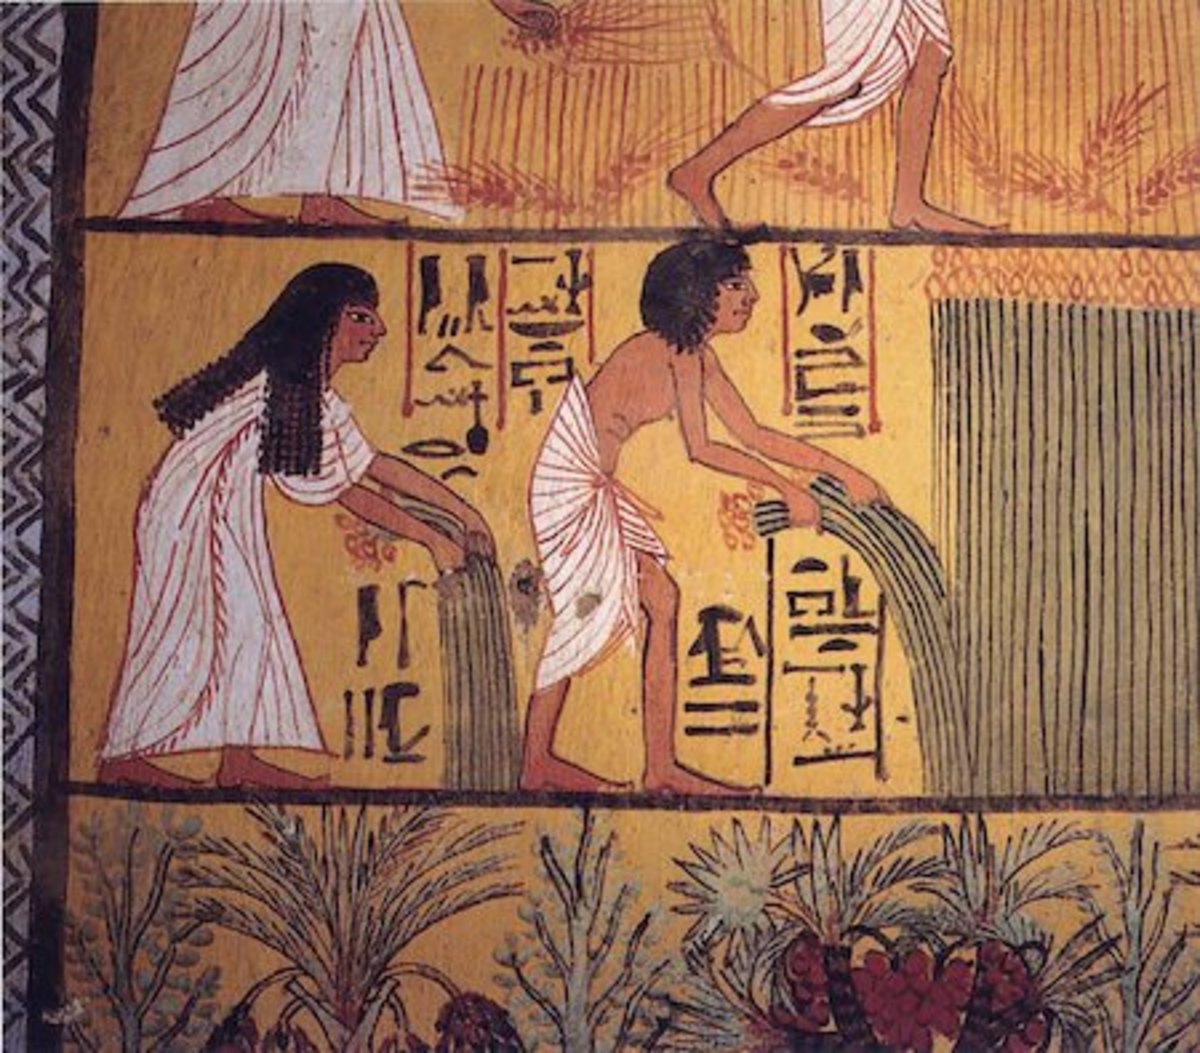 An ancient Ramesside mural from the tomb at Deir el-Medina shows an Egyptian couple picking up.